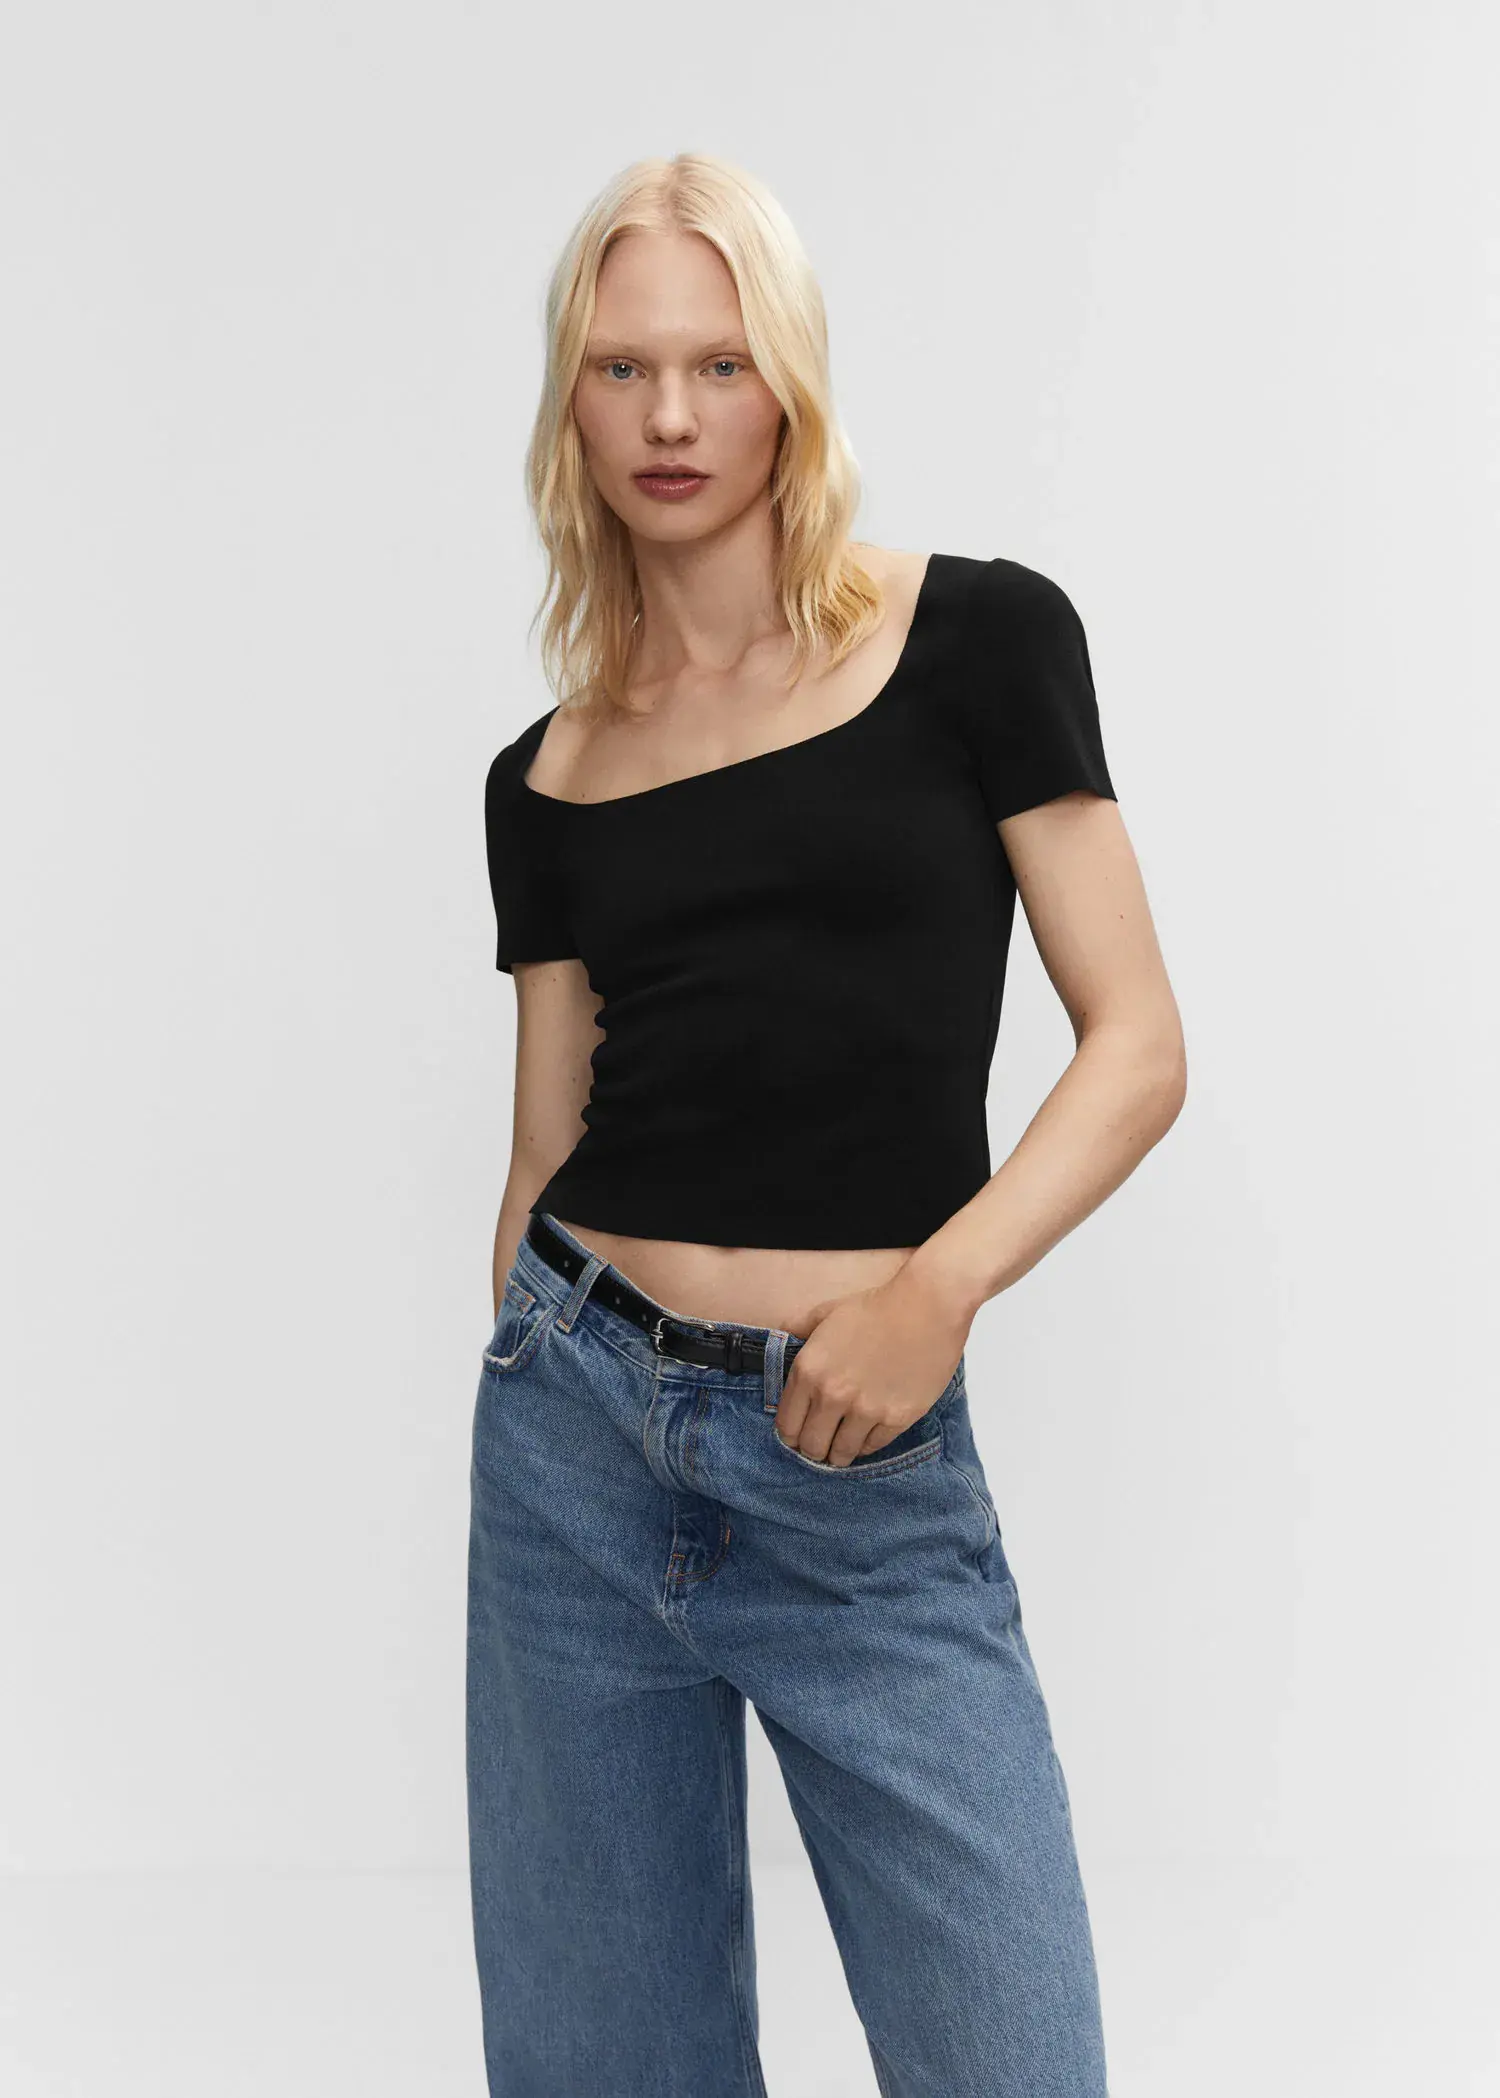 Mango Square neck t-shirt. a woman wearing a black top and jeans. 